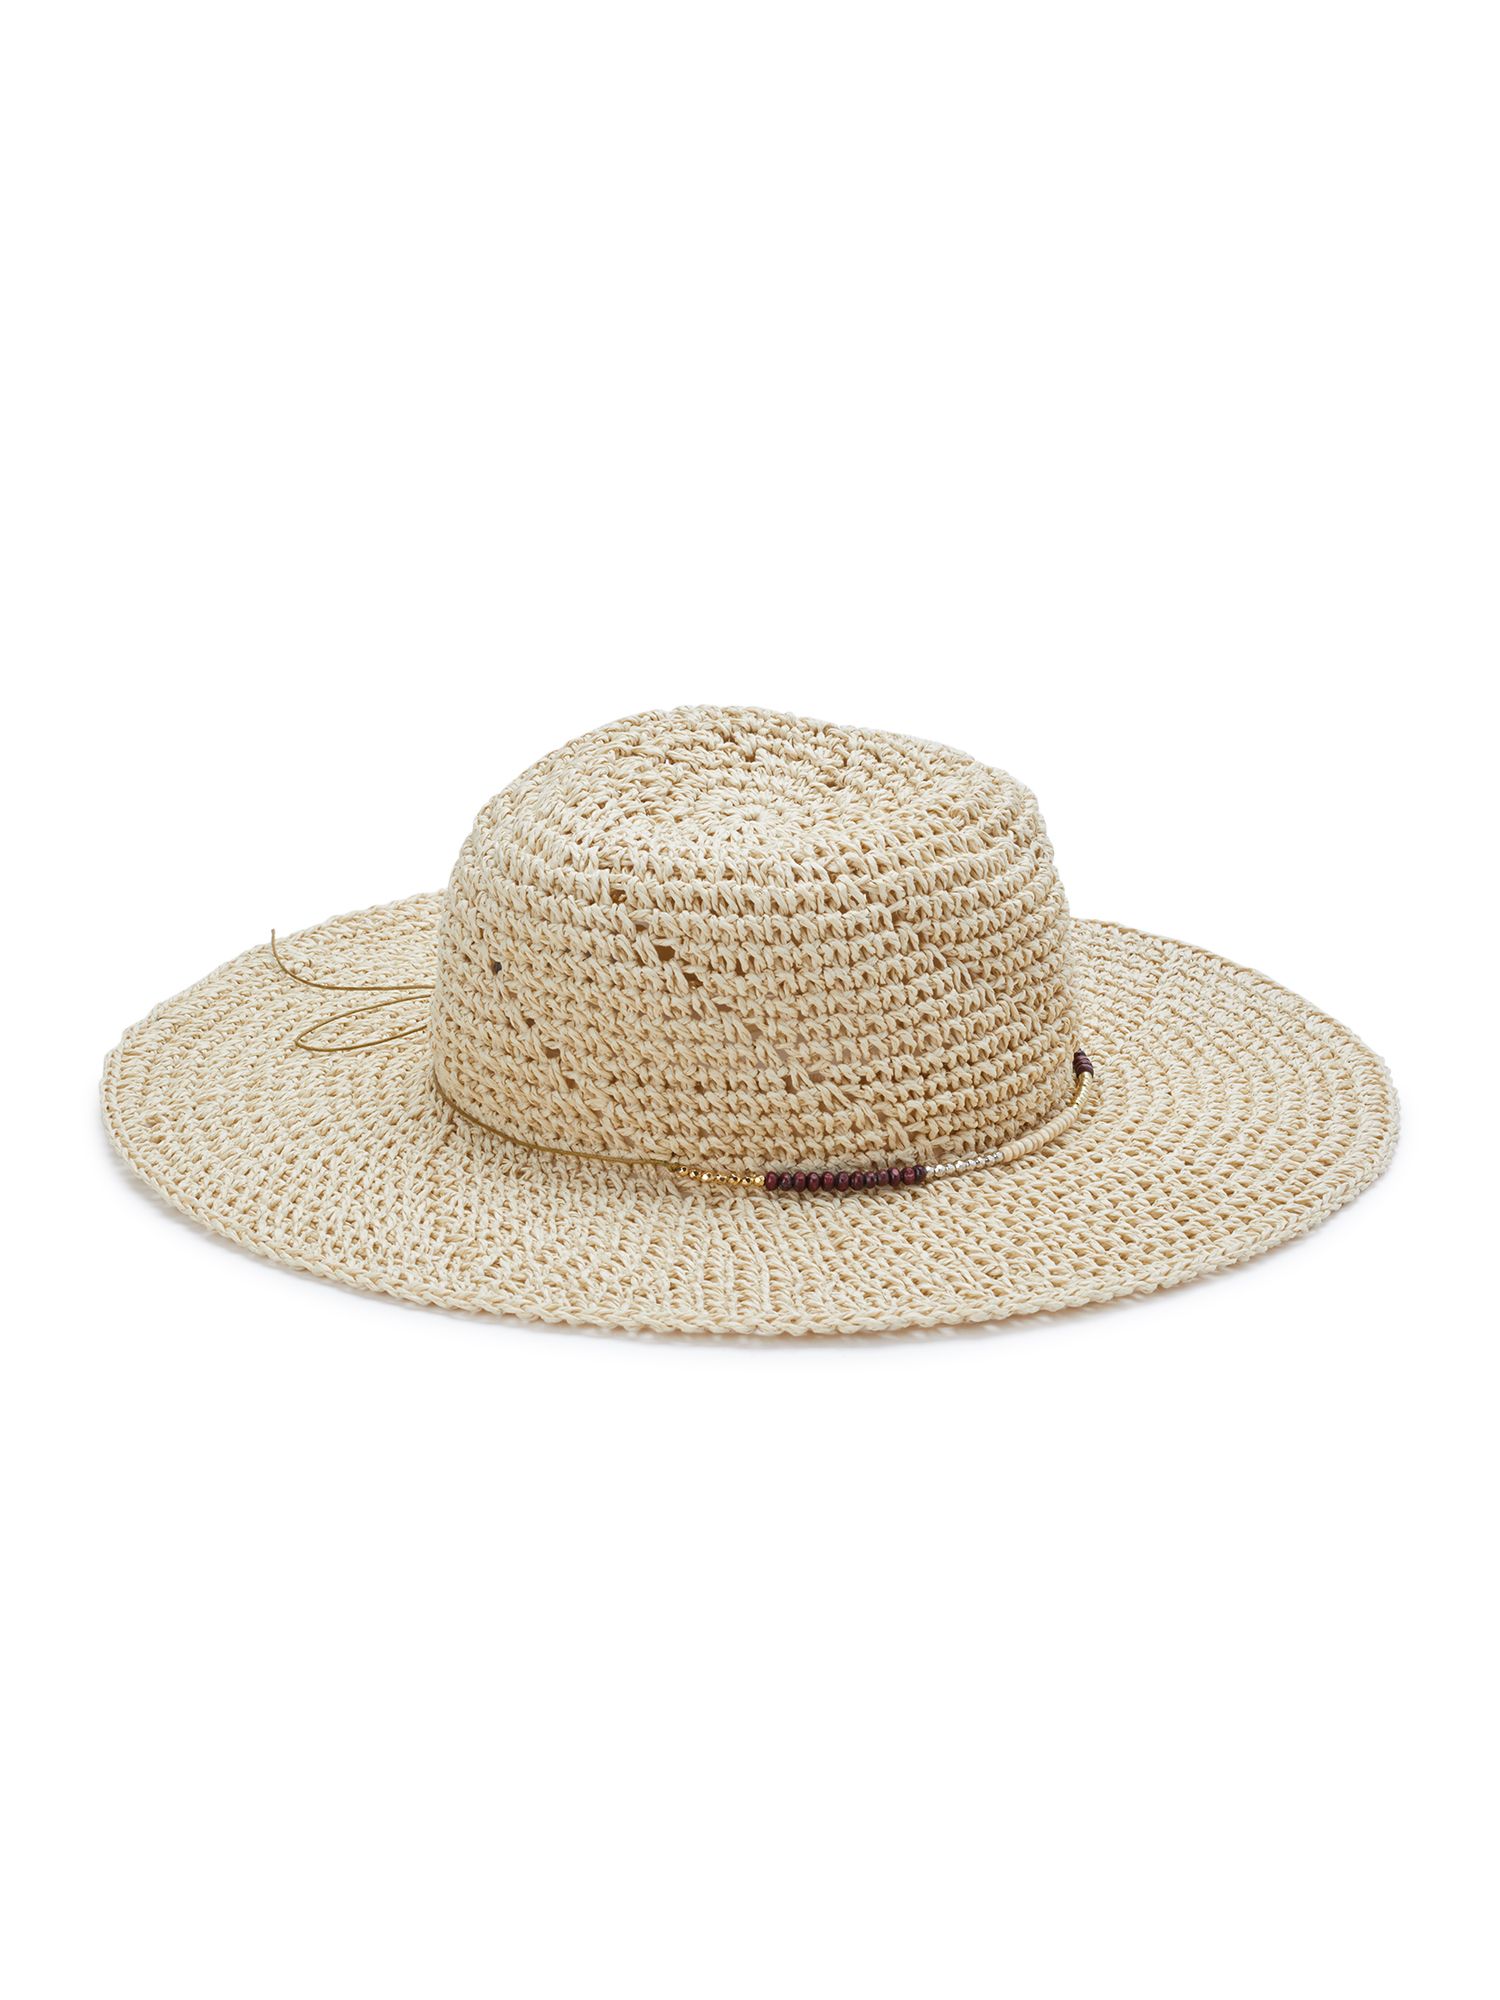 Eliza May Rose by Hat Attack Women's Packable Sunhat With Patchwork Bead Trim | Walmart (US)